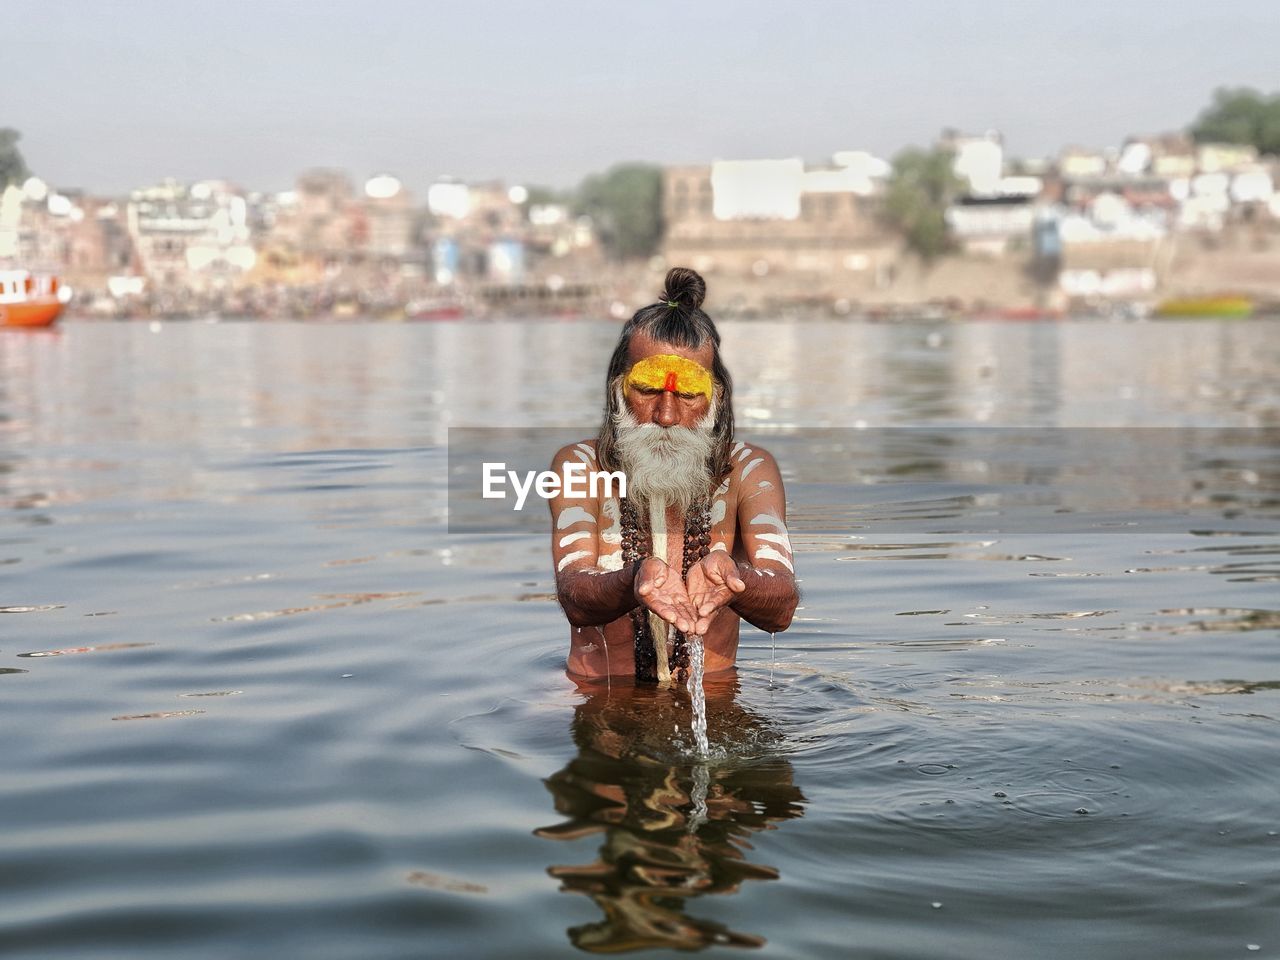 water, one person, architecture, nature, sea, city, day, front view, outdoors, swimming, building exterior, childhood, portrait, built structure, sky, waterfront, fun, men, child, adult, lifestyles, animal, clothing, looking at camera, focus on foreground, building, reflection